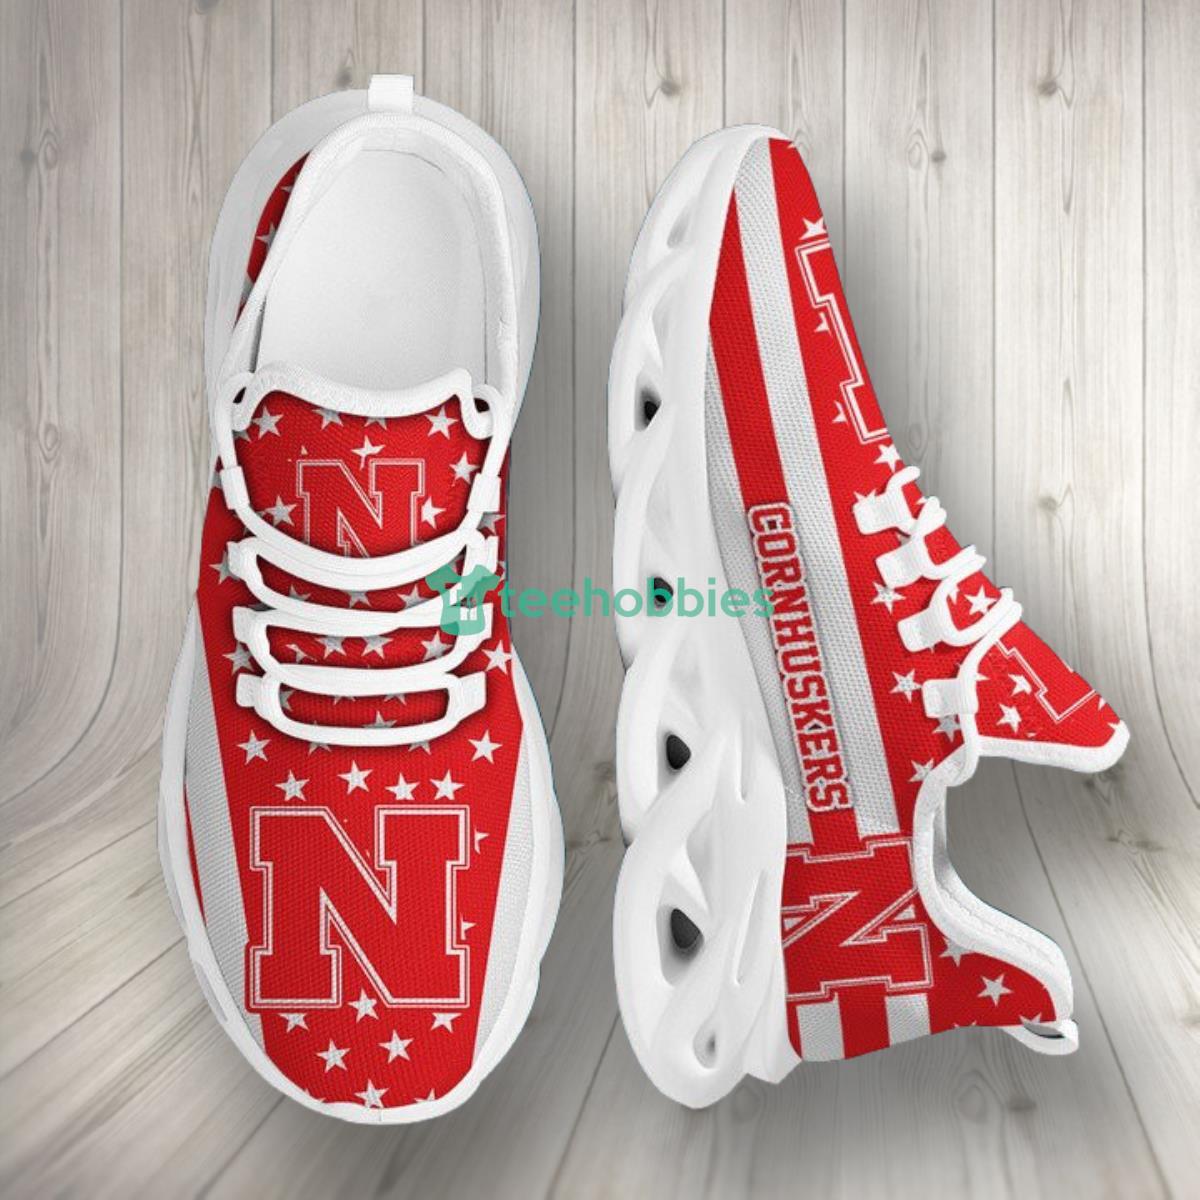 Nebraska Cornhuskers Max Soul Shoes New Model Sneakers Unique Gift For Fans Product Photo 2